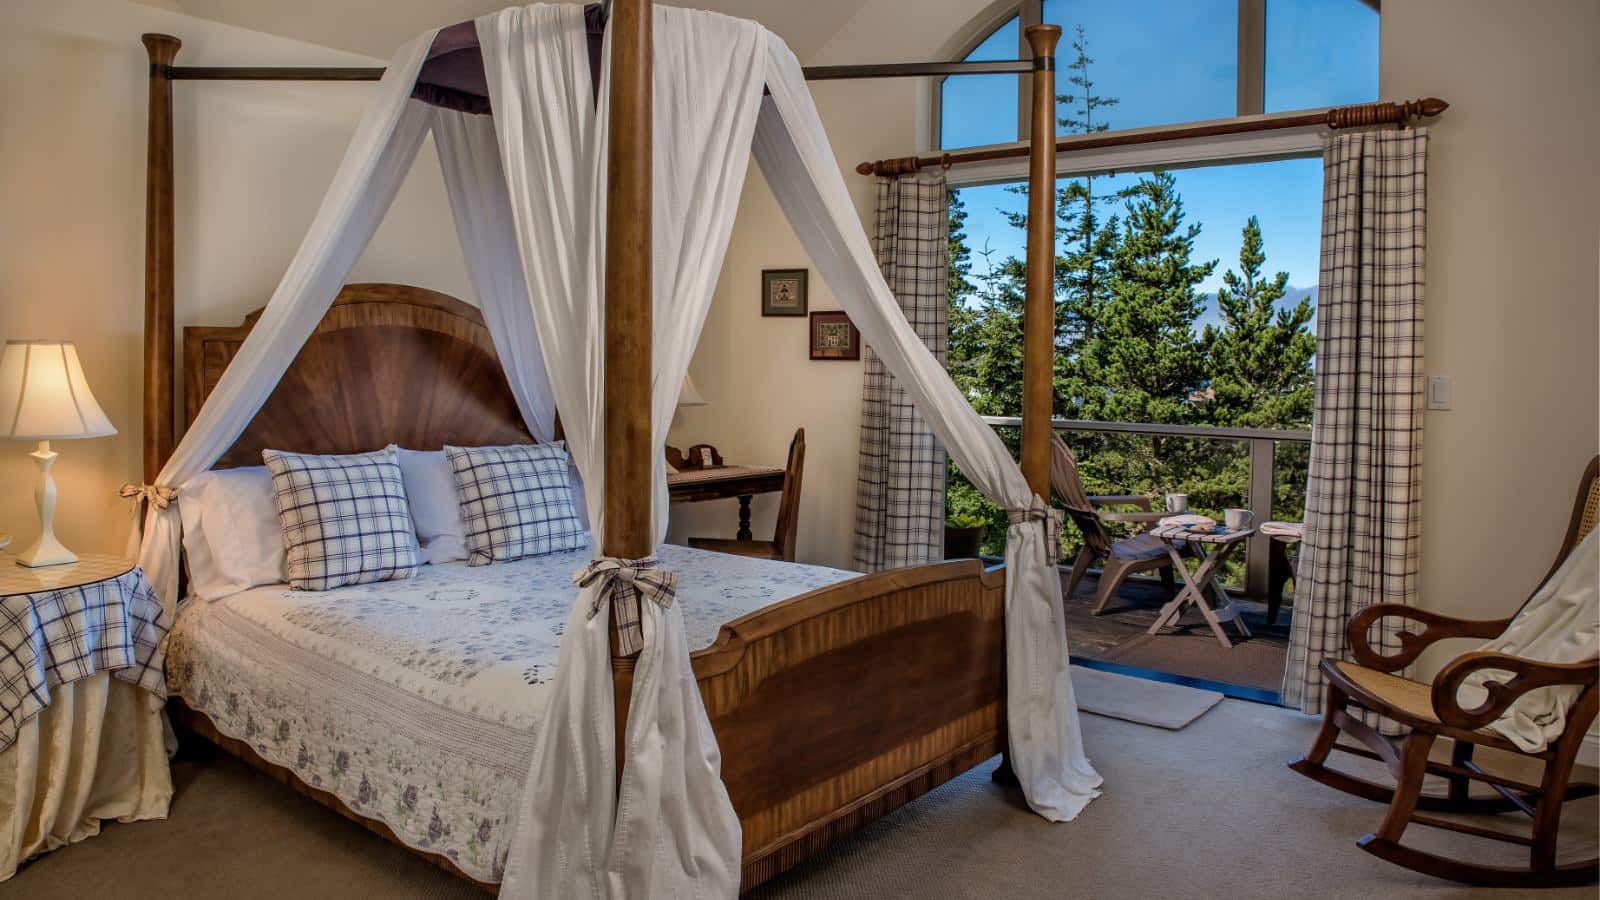 Bedroom with light colored walls, carpeting, wooden four poster bed with canopy, white bedding, and balcony with patio furniture